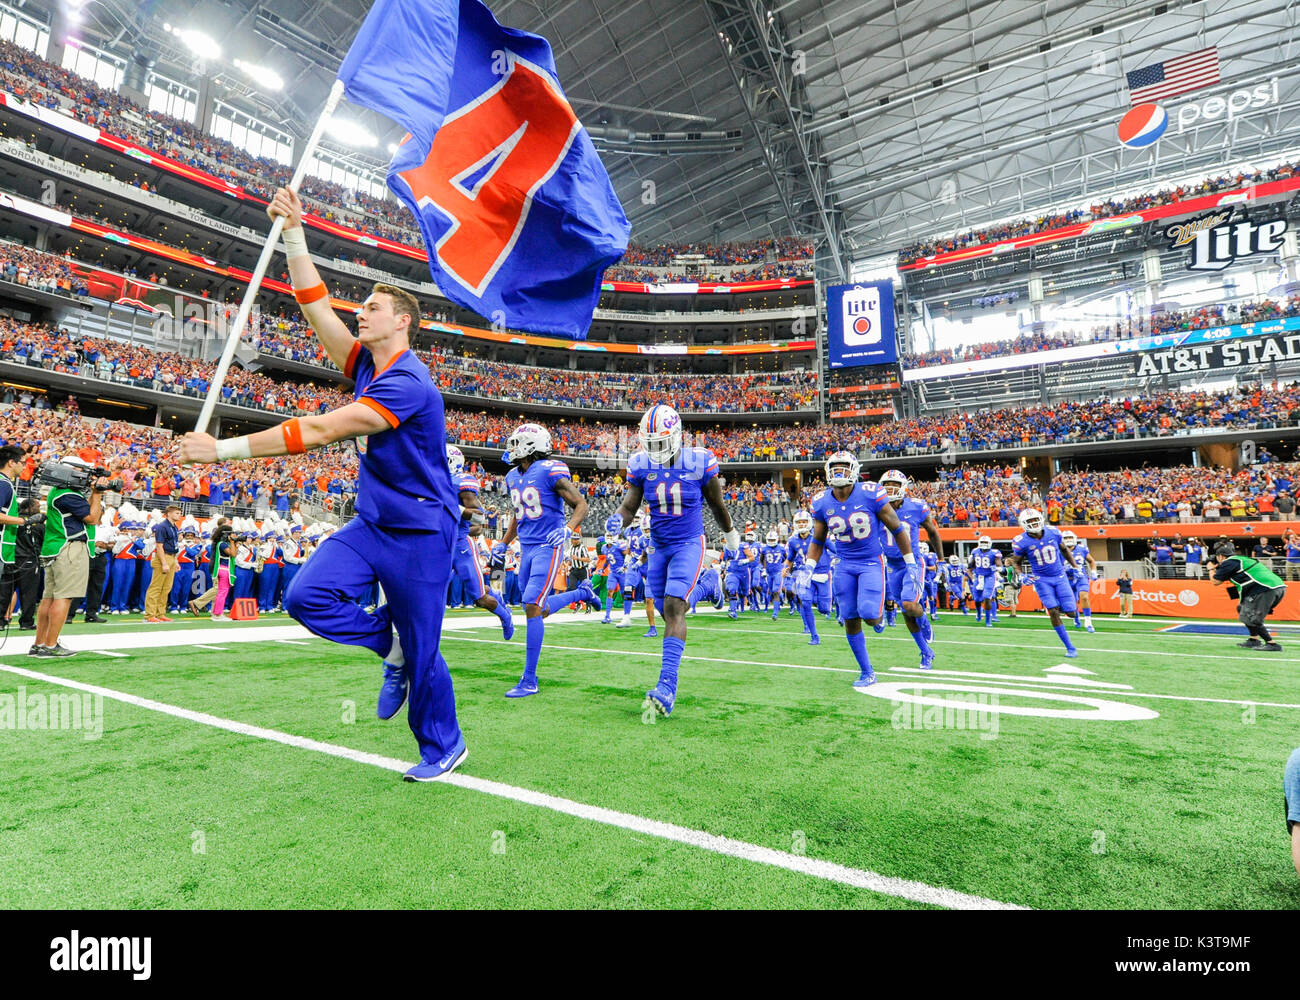 September 02, 2017: The Florida Gators football team enters the field before the Advocare Classic NCAA Football game between the University of Michigan Wolverines and the University of Florida Gators at AT&T Stadium in Arlington, TX Michigan defeated Florida 33-17 Albert Pena/CSM Stock Photo